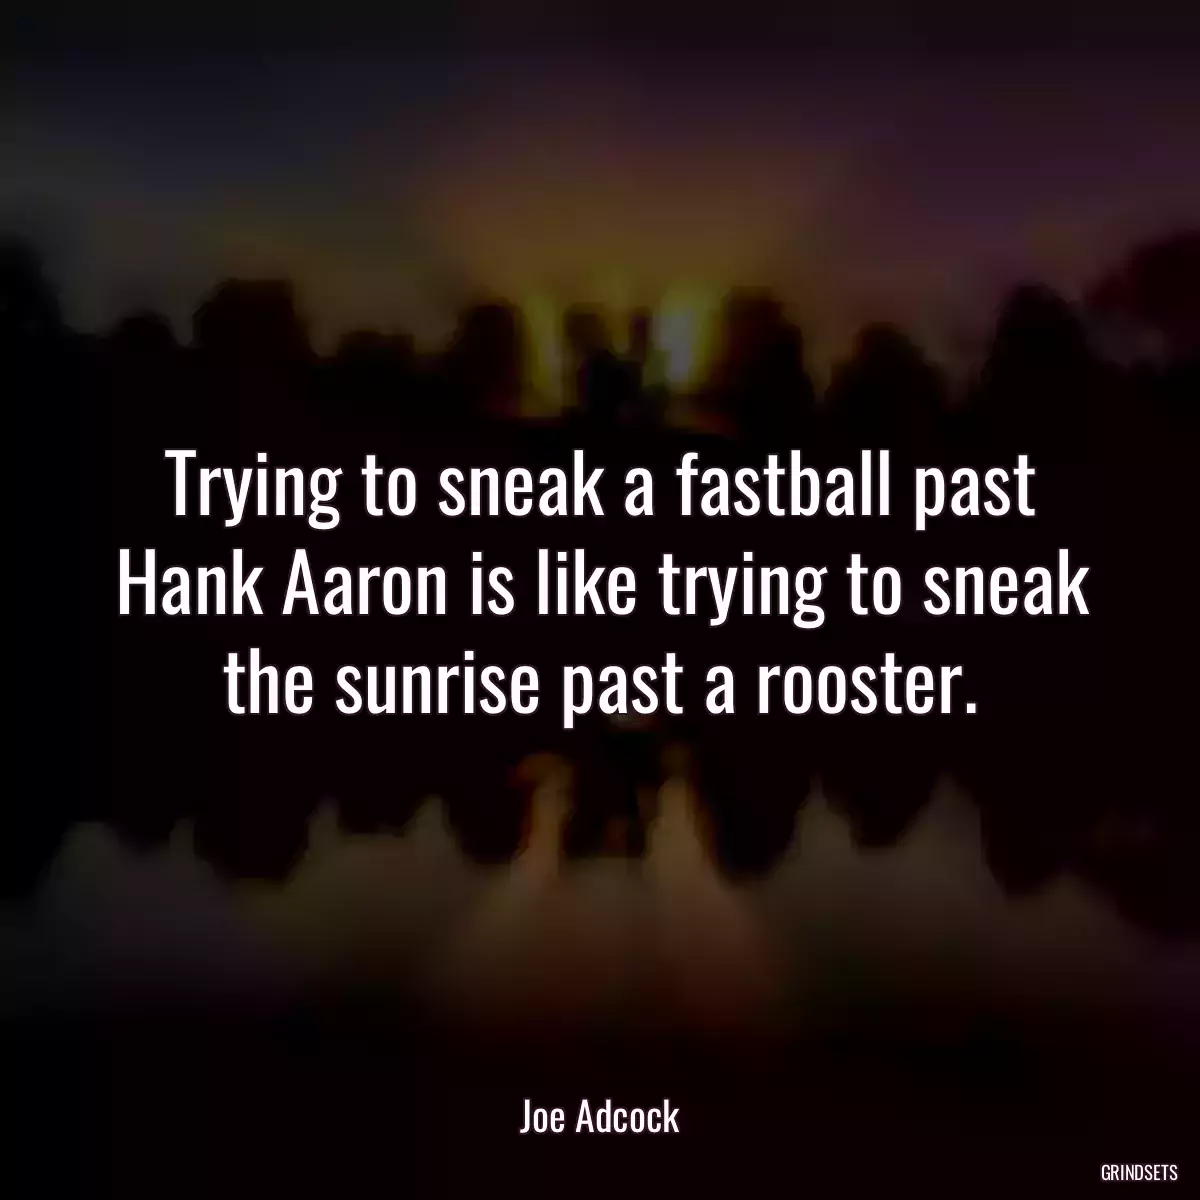 Trying to sneak a fastball past Hank Aaron is like trying to sneak the sunrise past a rooster.